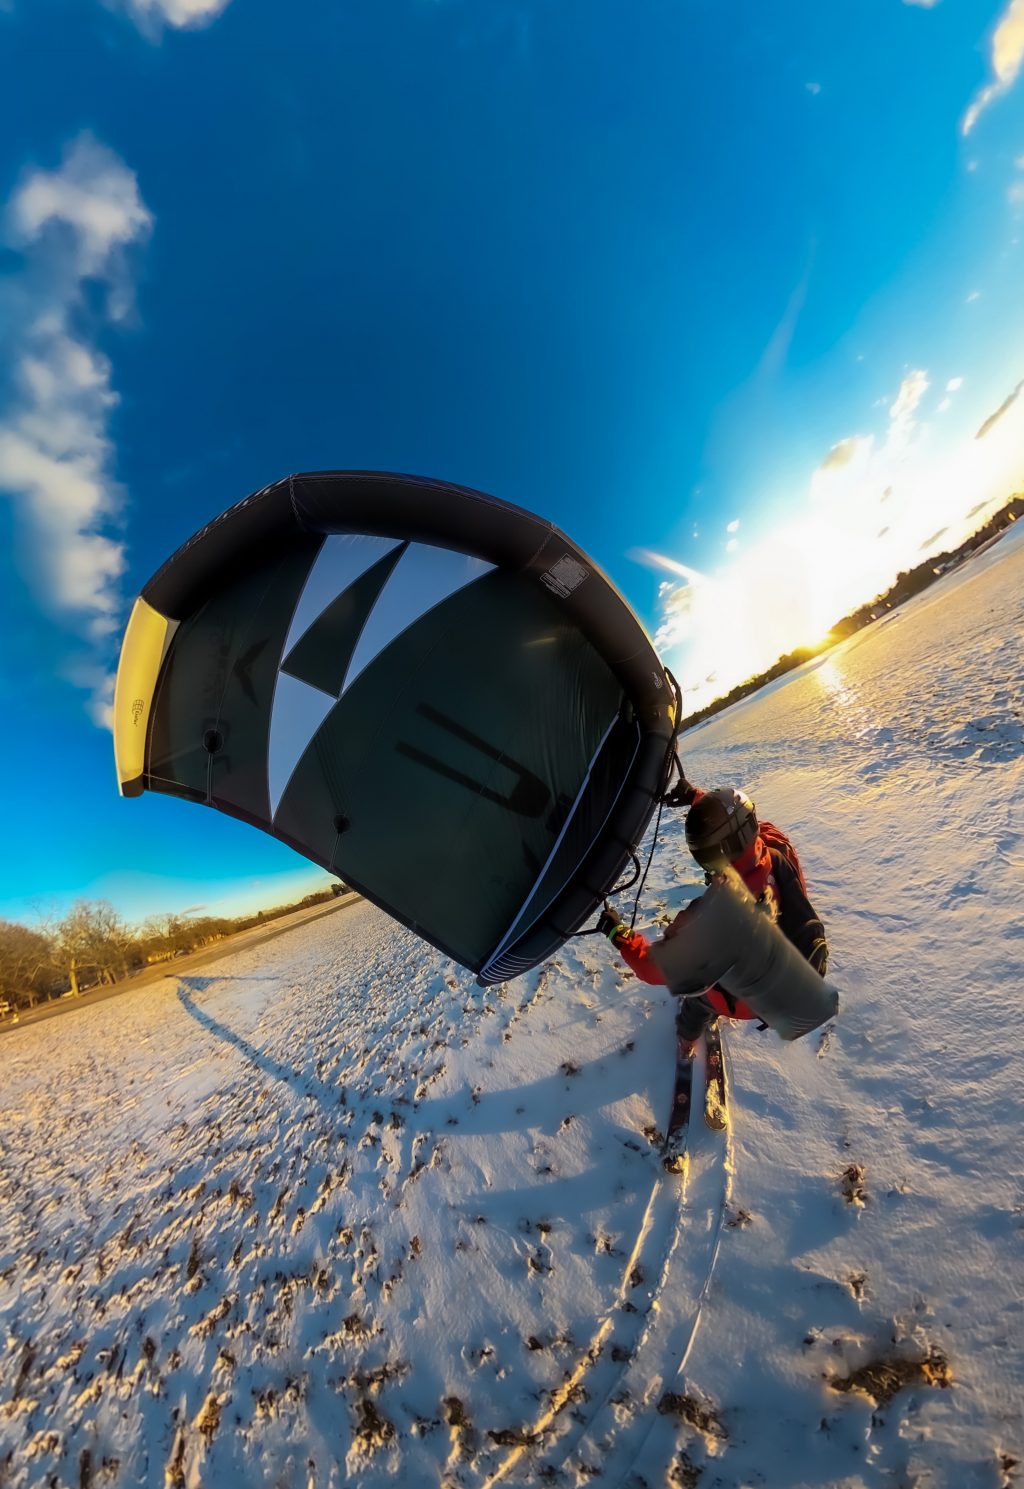 Skiing with a wing at sunset 